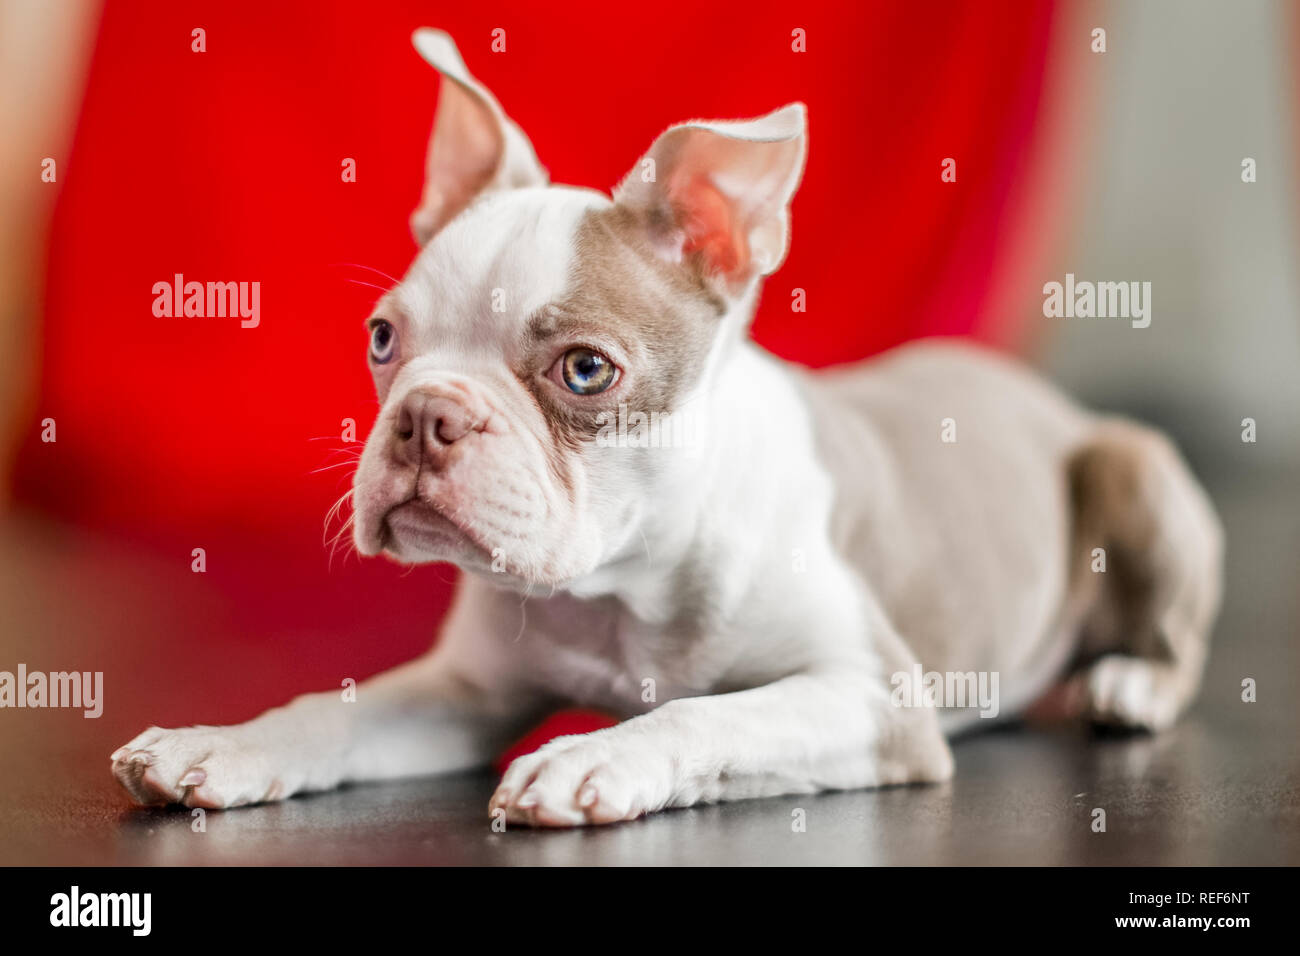 close up Boston terrier puppy portrait lying on a black shiny floor with a red curtain background. looking to the side Stock Photo